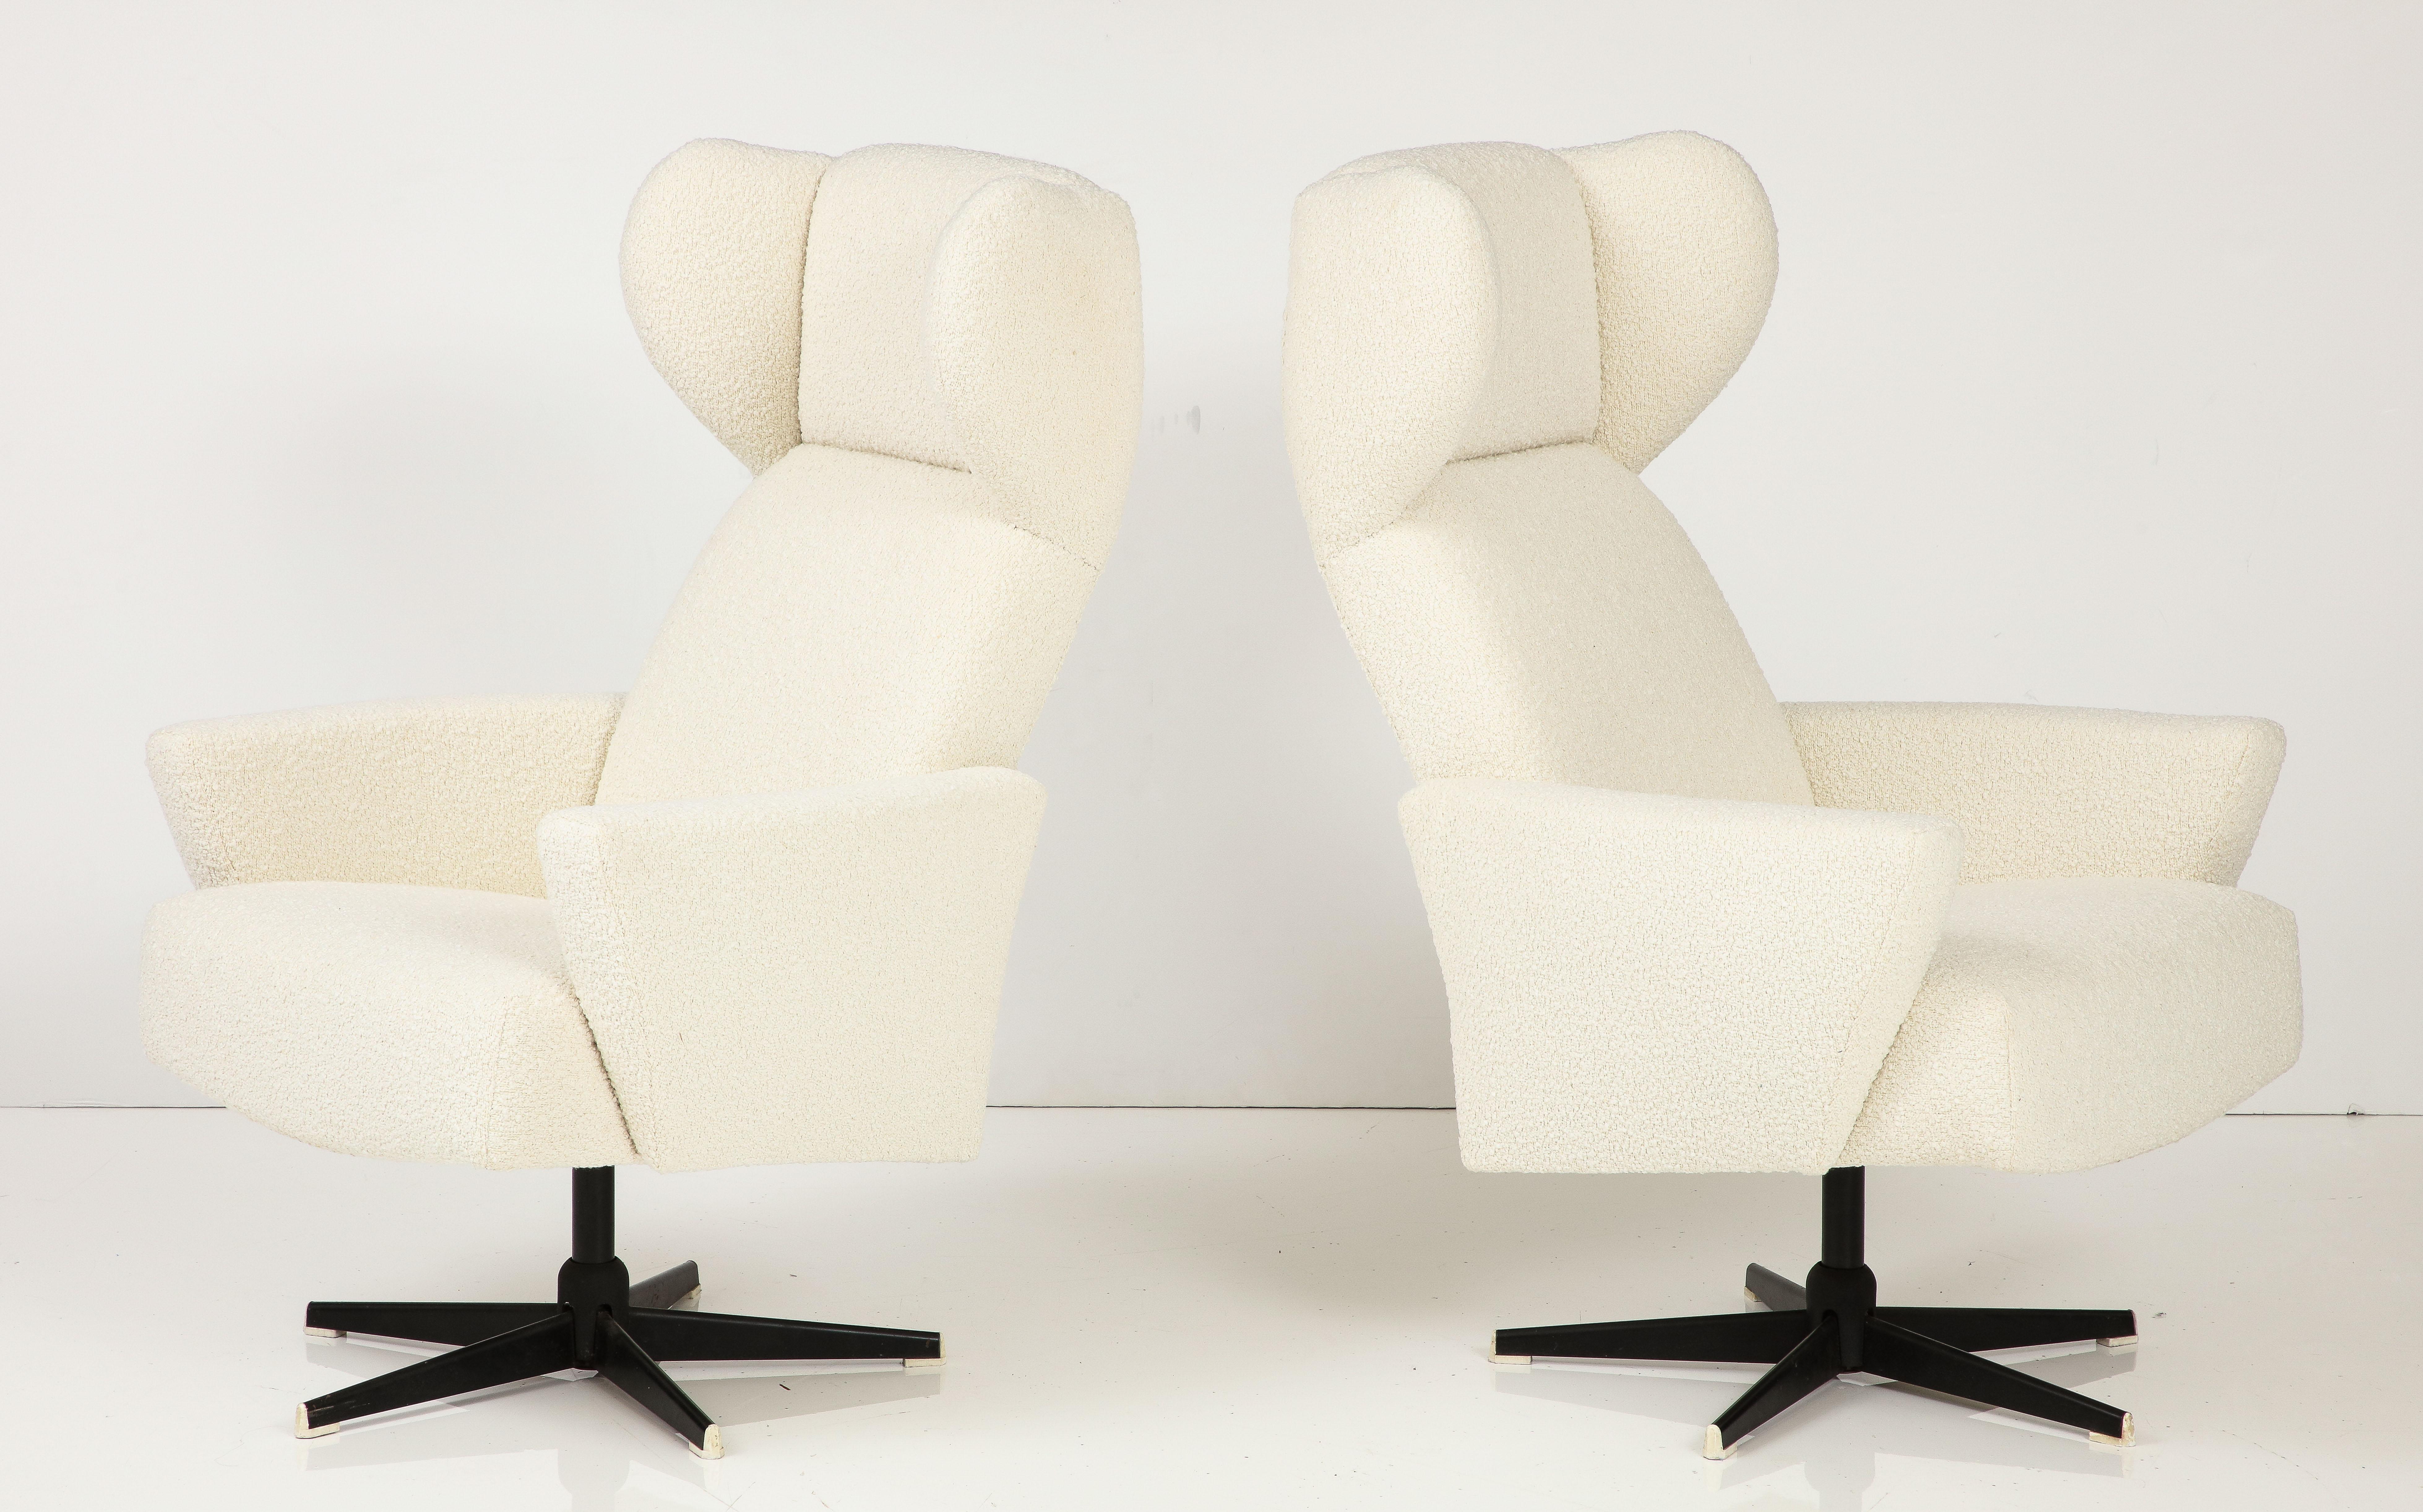 Metal Pair of Italian Modernist High-Back Swivel Chairs, Italy, circa 1960 For Sale